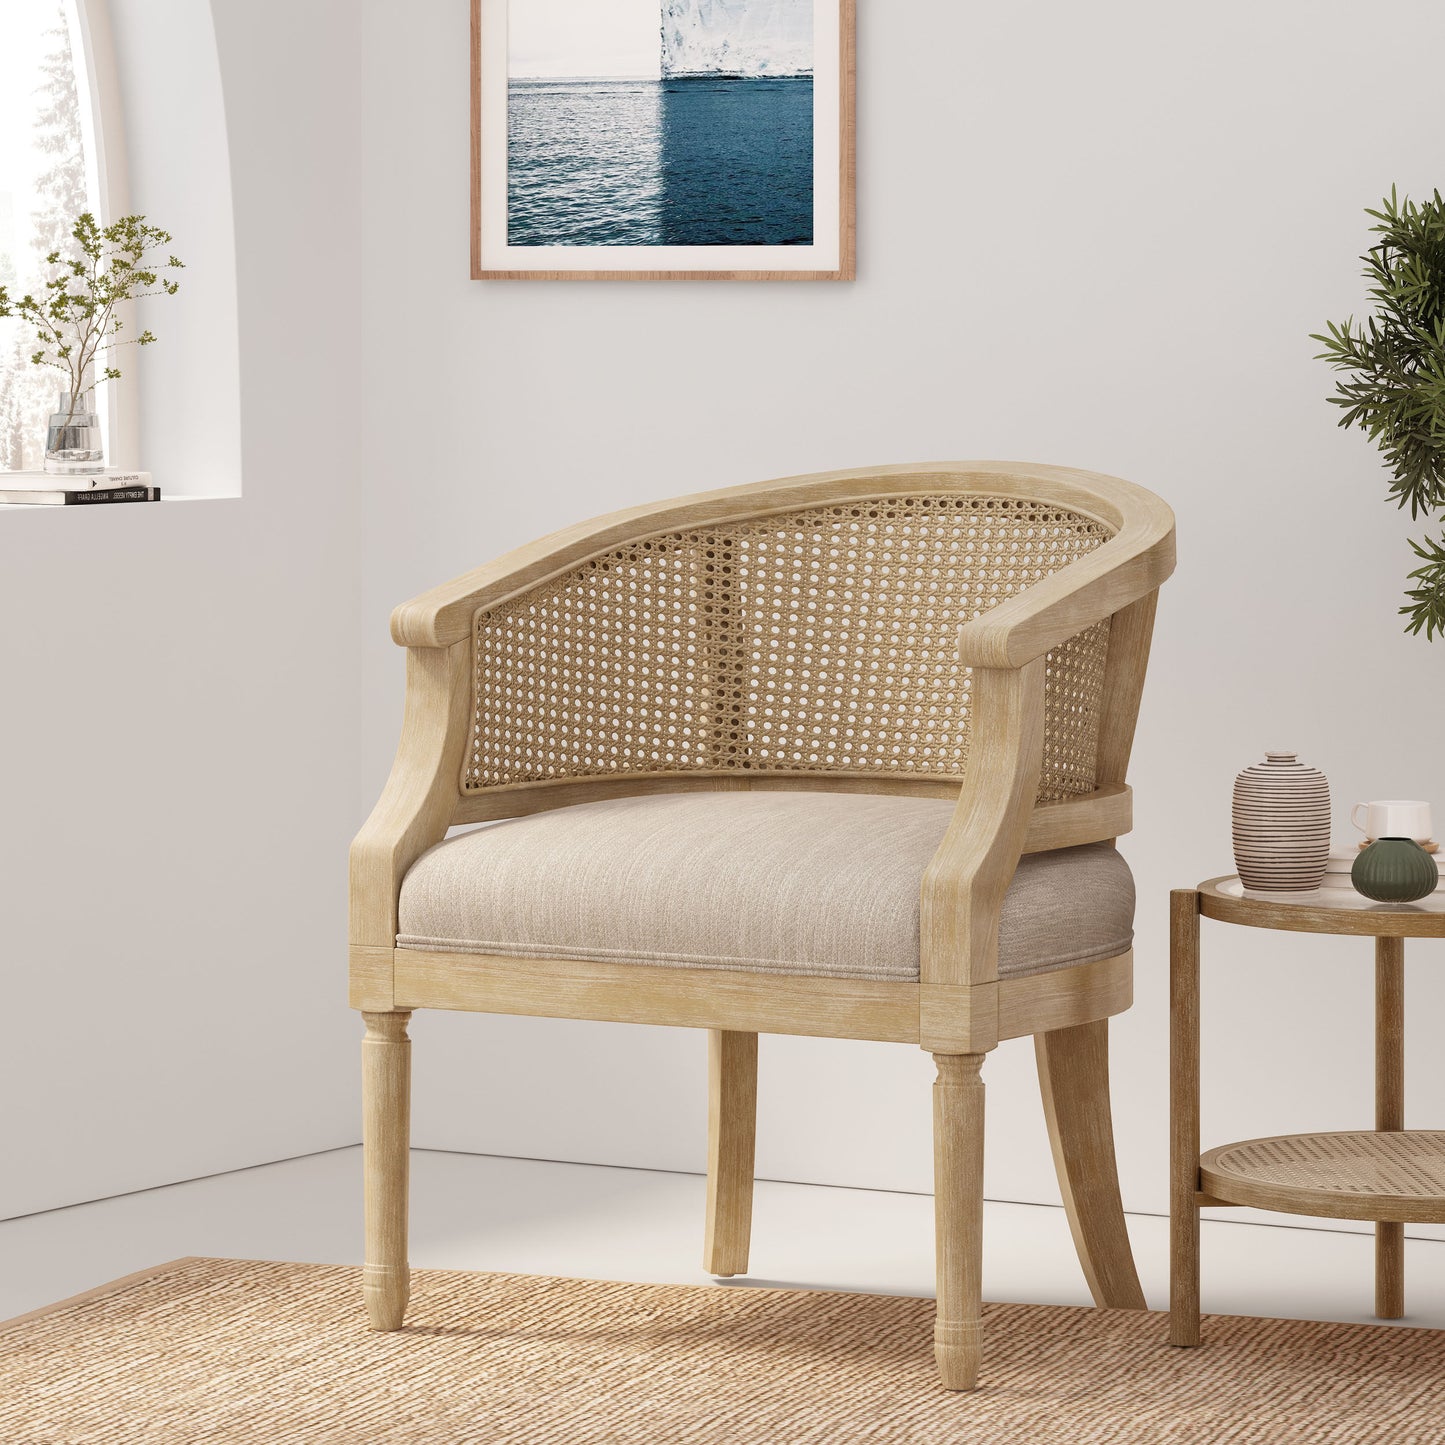 Velie French Country Wood and Cane Accent Chair